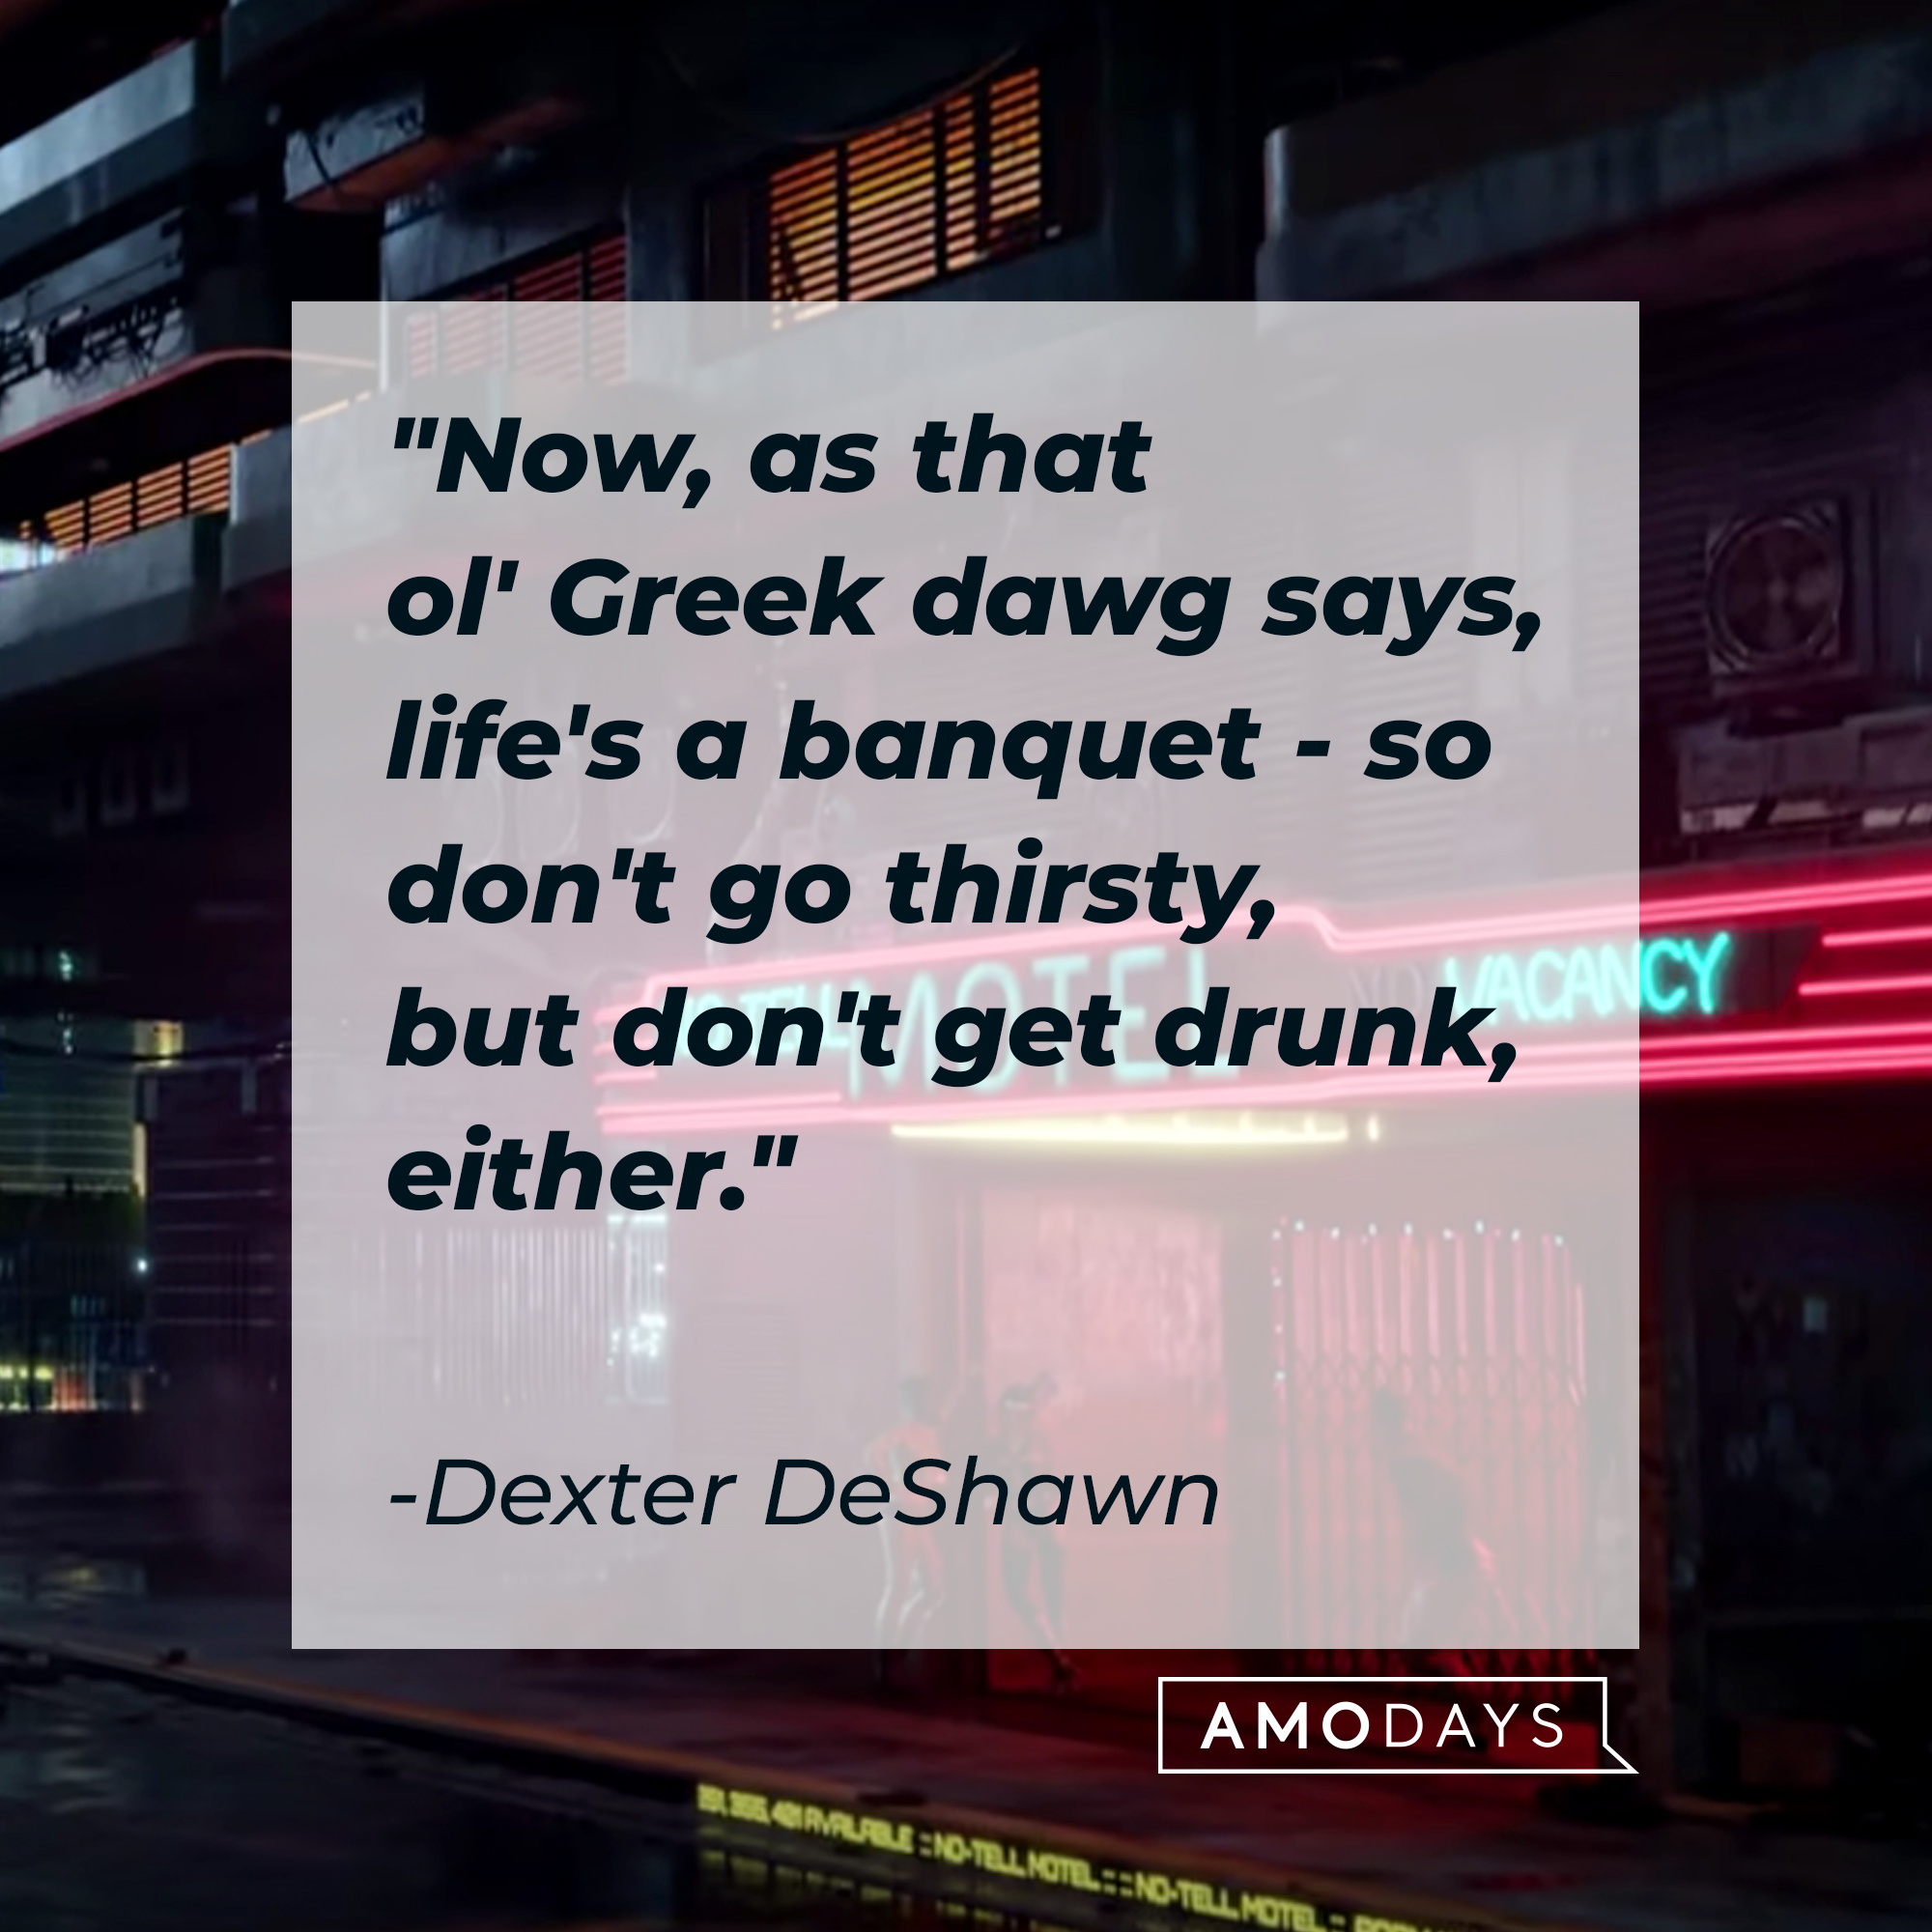 Dexter DeShawn's quote: "Now, as that ol' Greek dawg says, life's a banquet - so don't go thirsty, but don't get drunk, either." | Source: youtube.com/CyberpunkGame